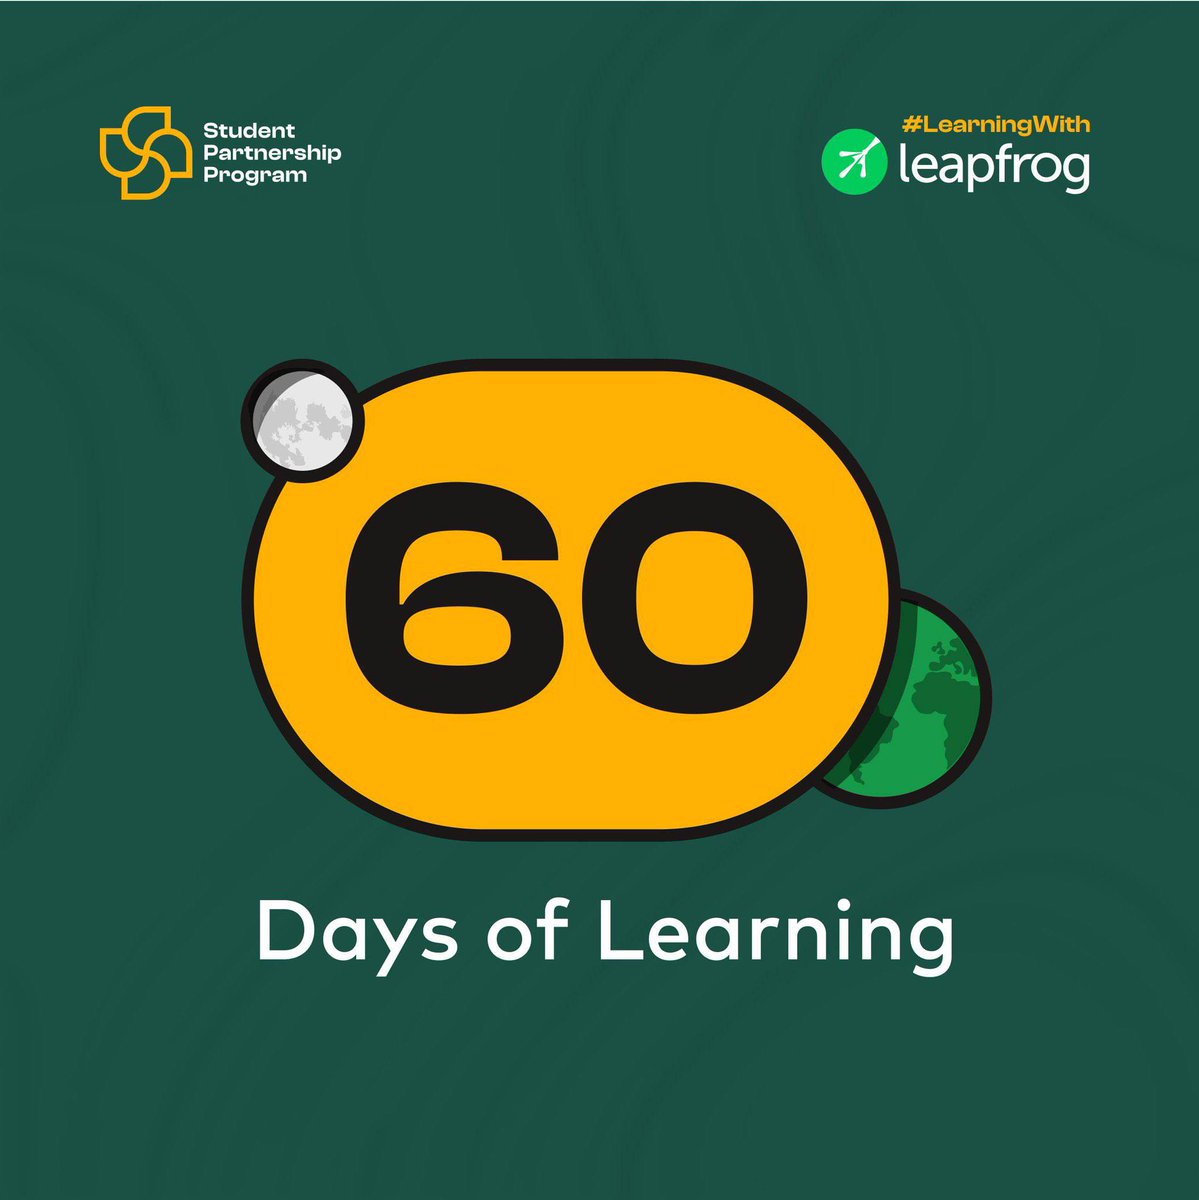 I am publicly committing to the #60DaysOfLearning challenge starting from tomorrow. I will learn java script in this challenge.
#LearningWithLeapfrog 
#LeapfrogStudentPartnershipProgram